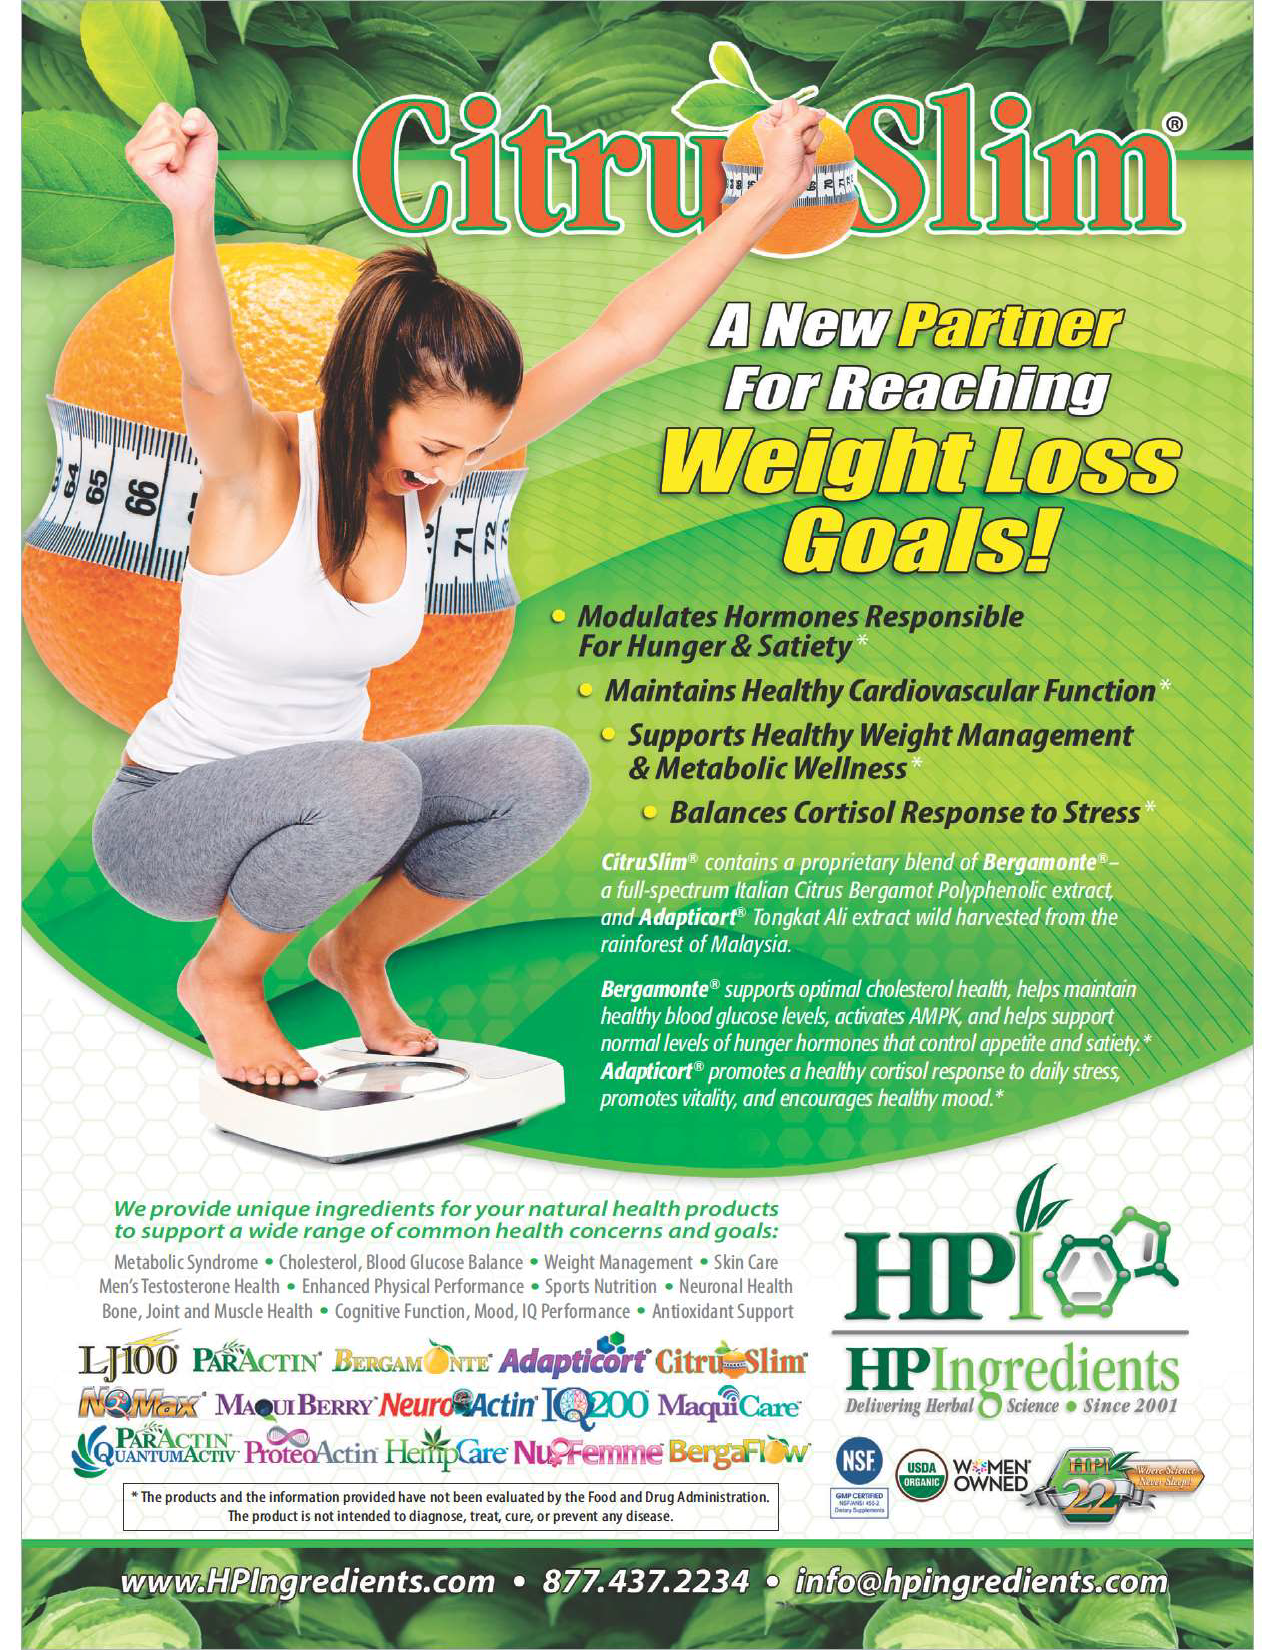 npi-pdg-healthyweightsupport-0623-hpi-2-page_page_1